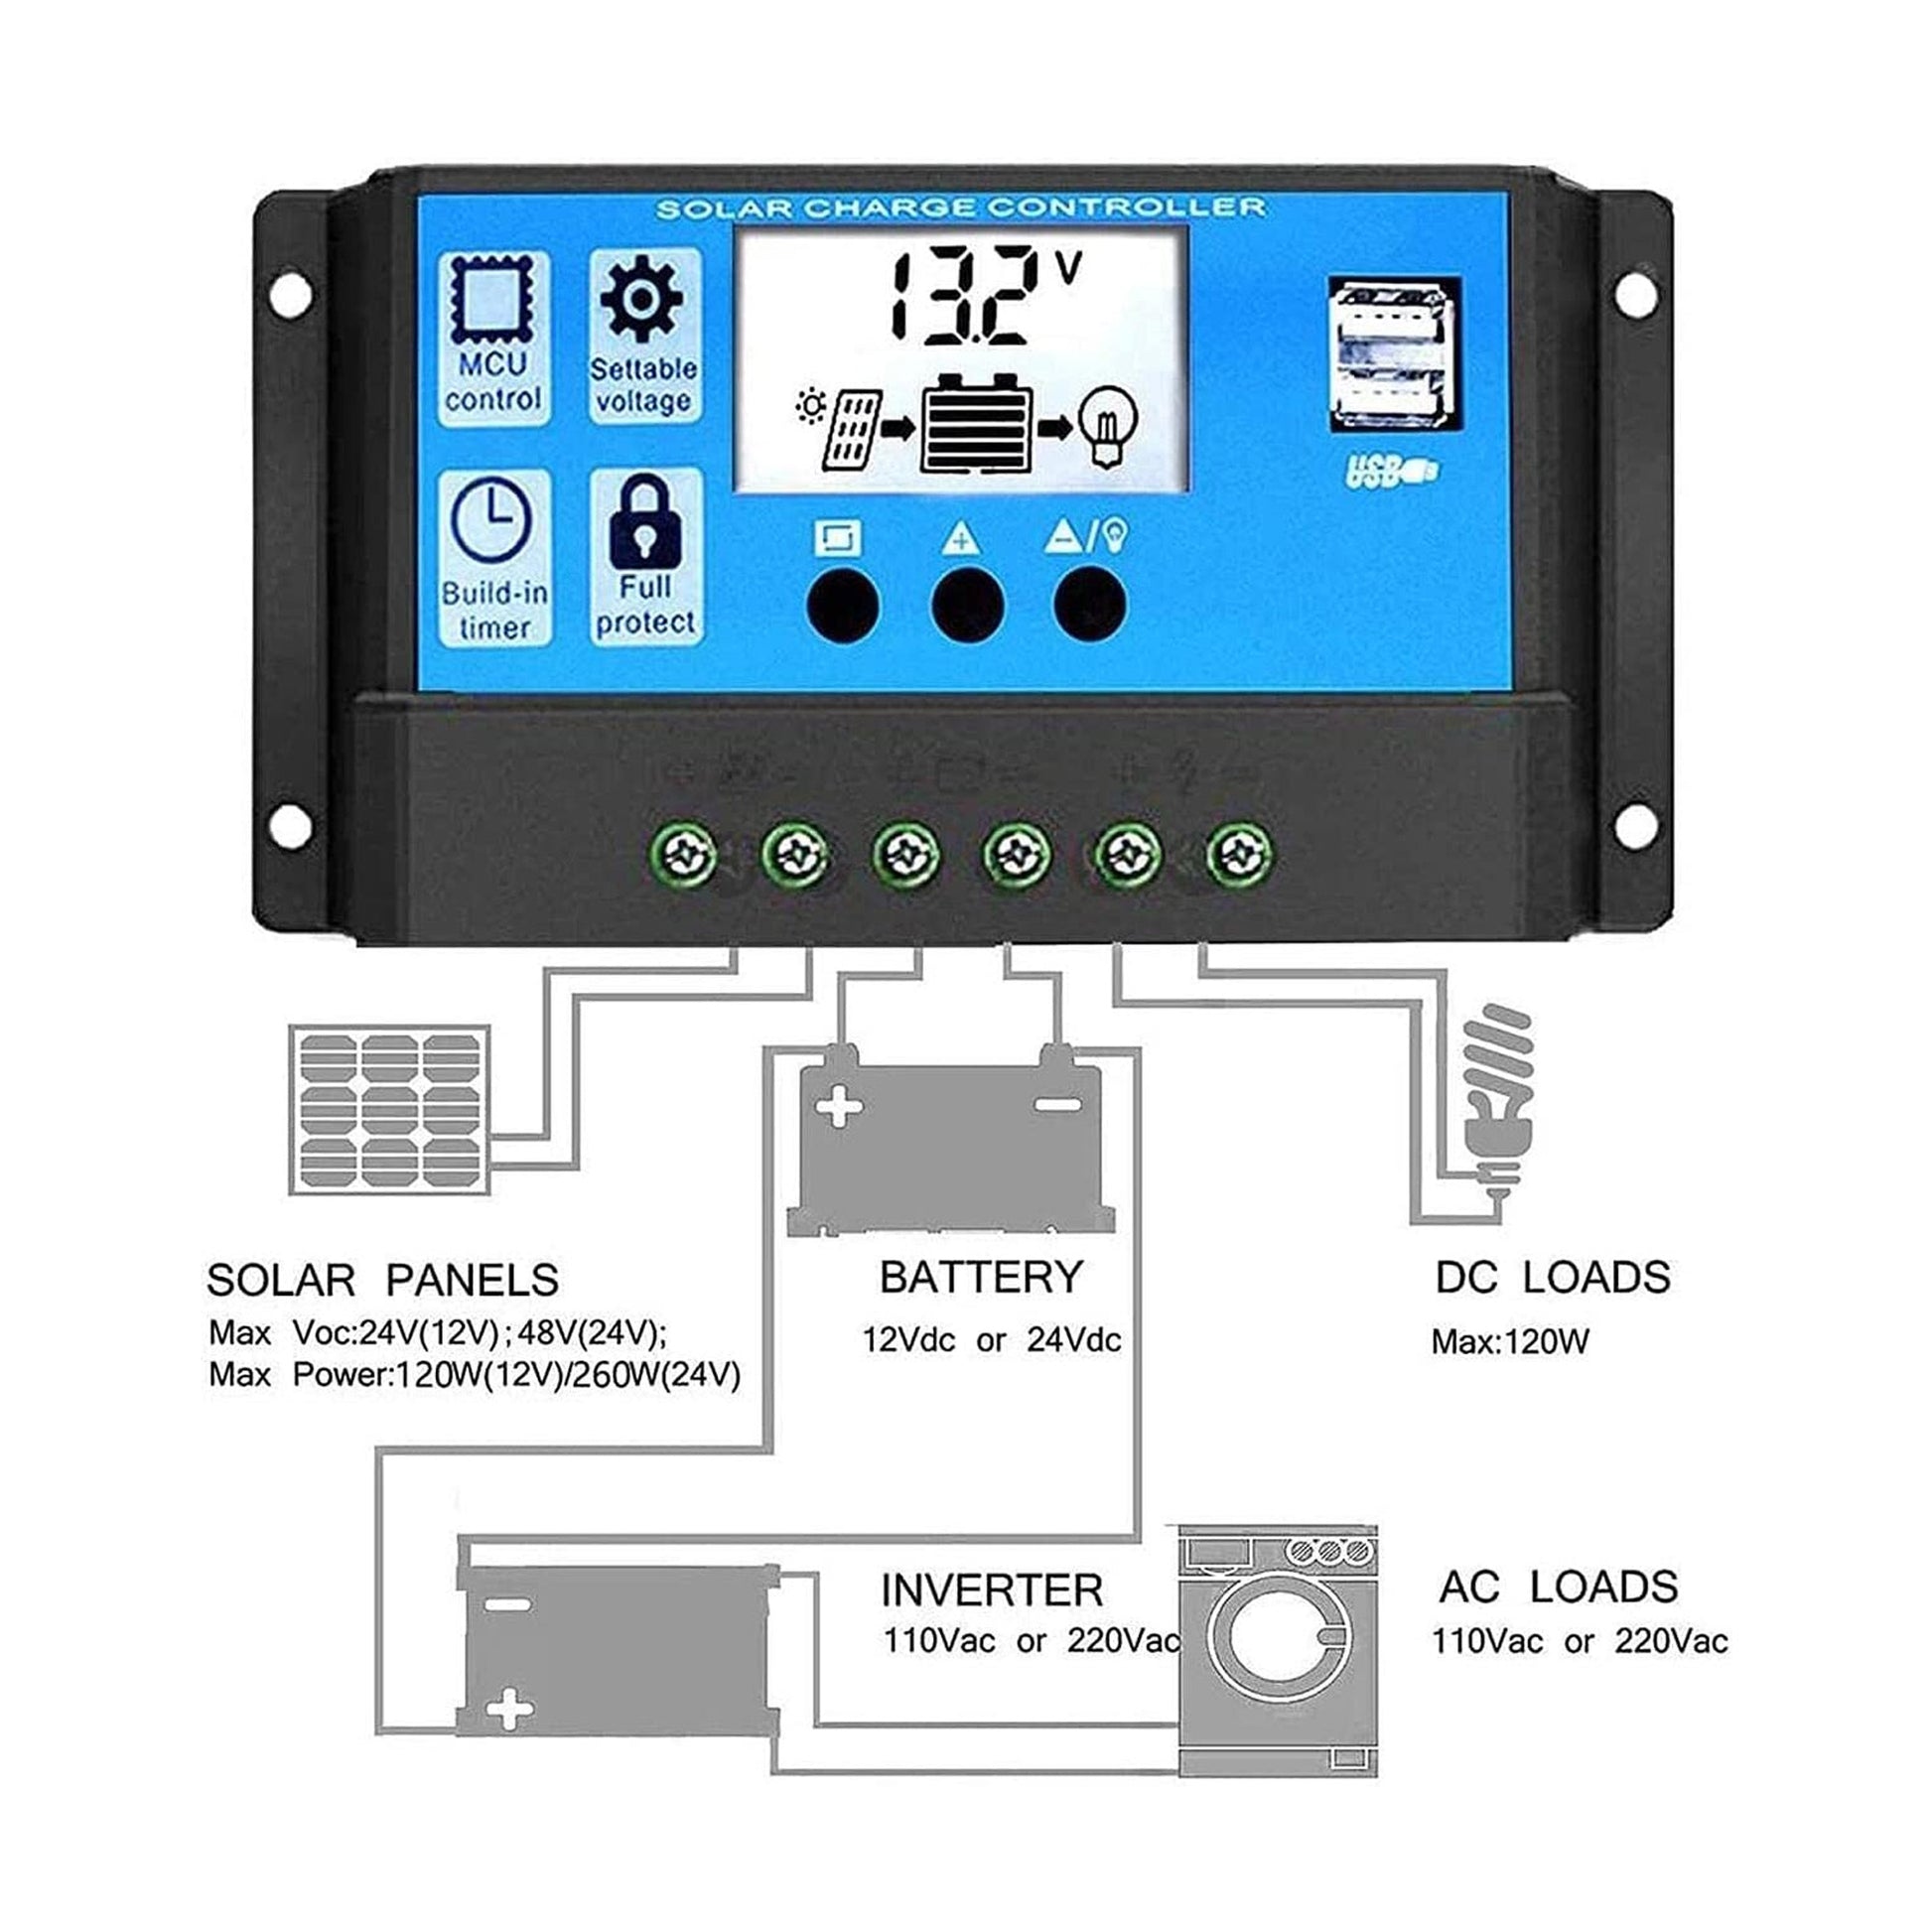 Solar Charge Controller, 30A Solar Panel Controller 12V 24V Adaptive PWM Auto Parameter Adjustable LCD Display Solar Panel Battery Regulator with Dual USB Port - RS5195 - REES52